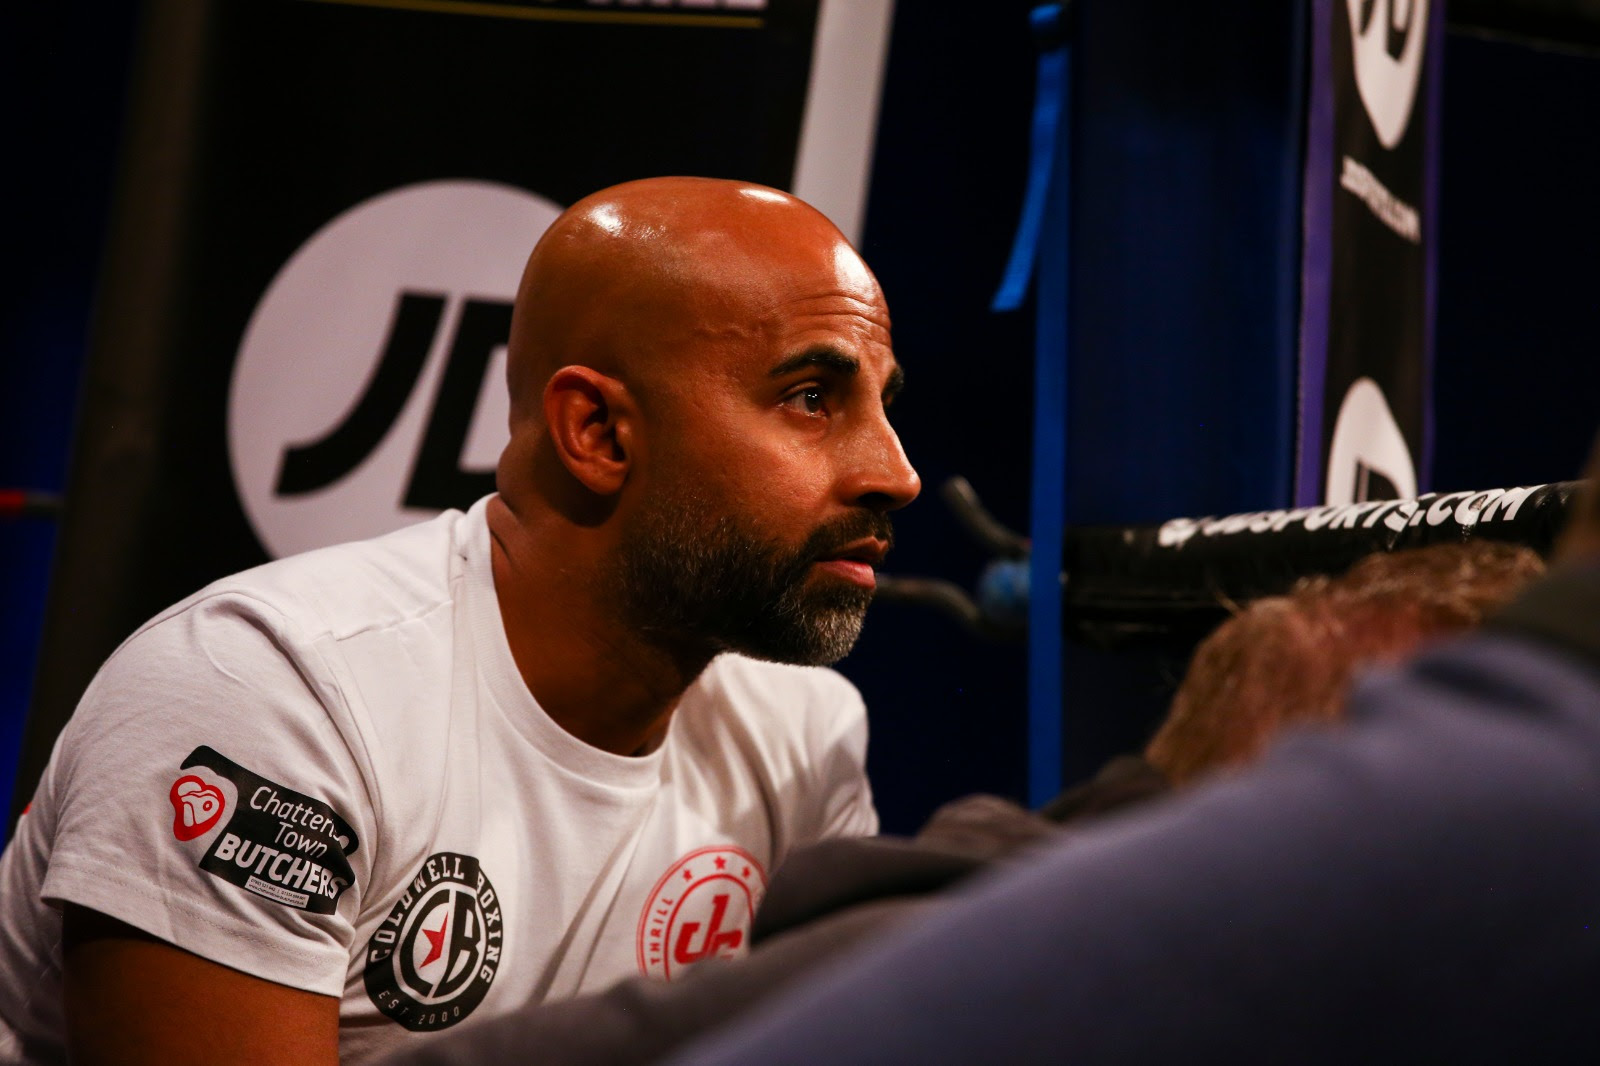 Dave Coldwell